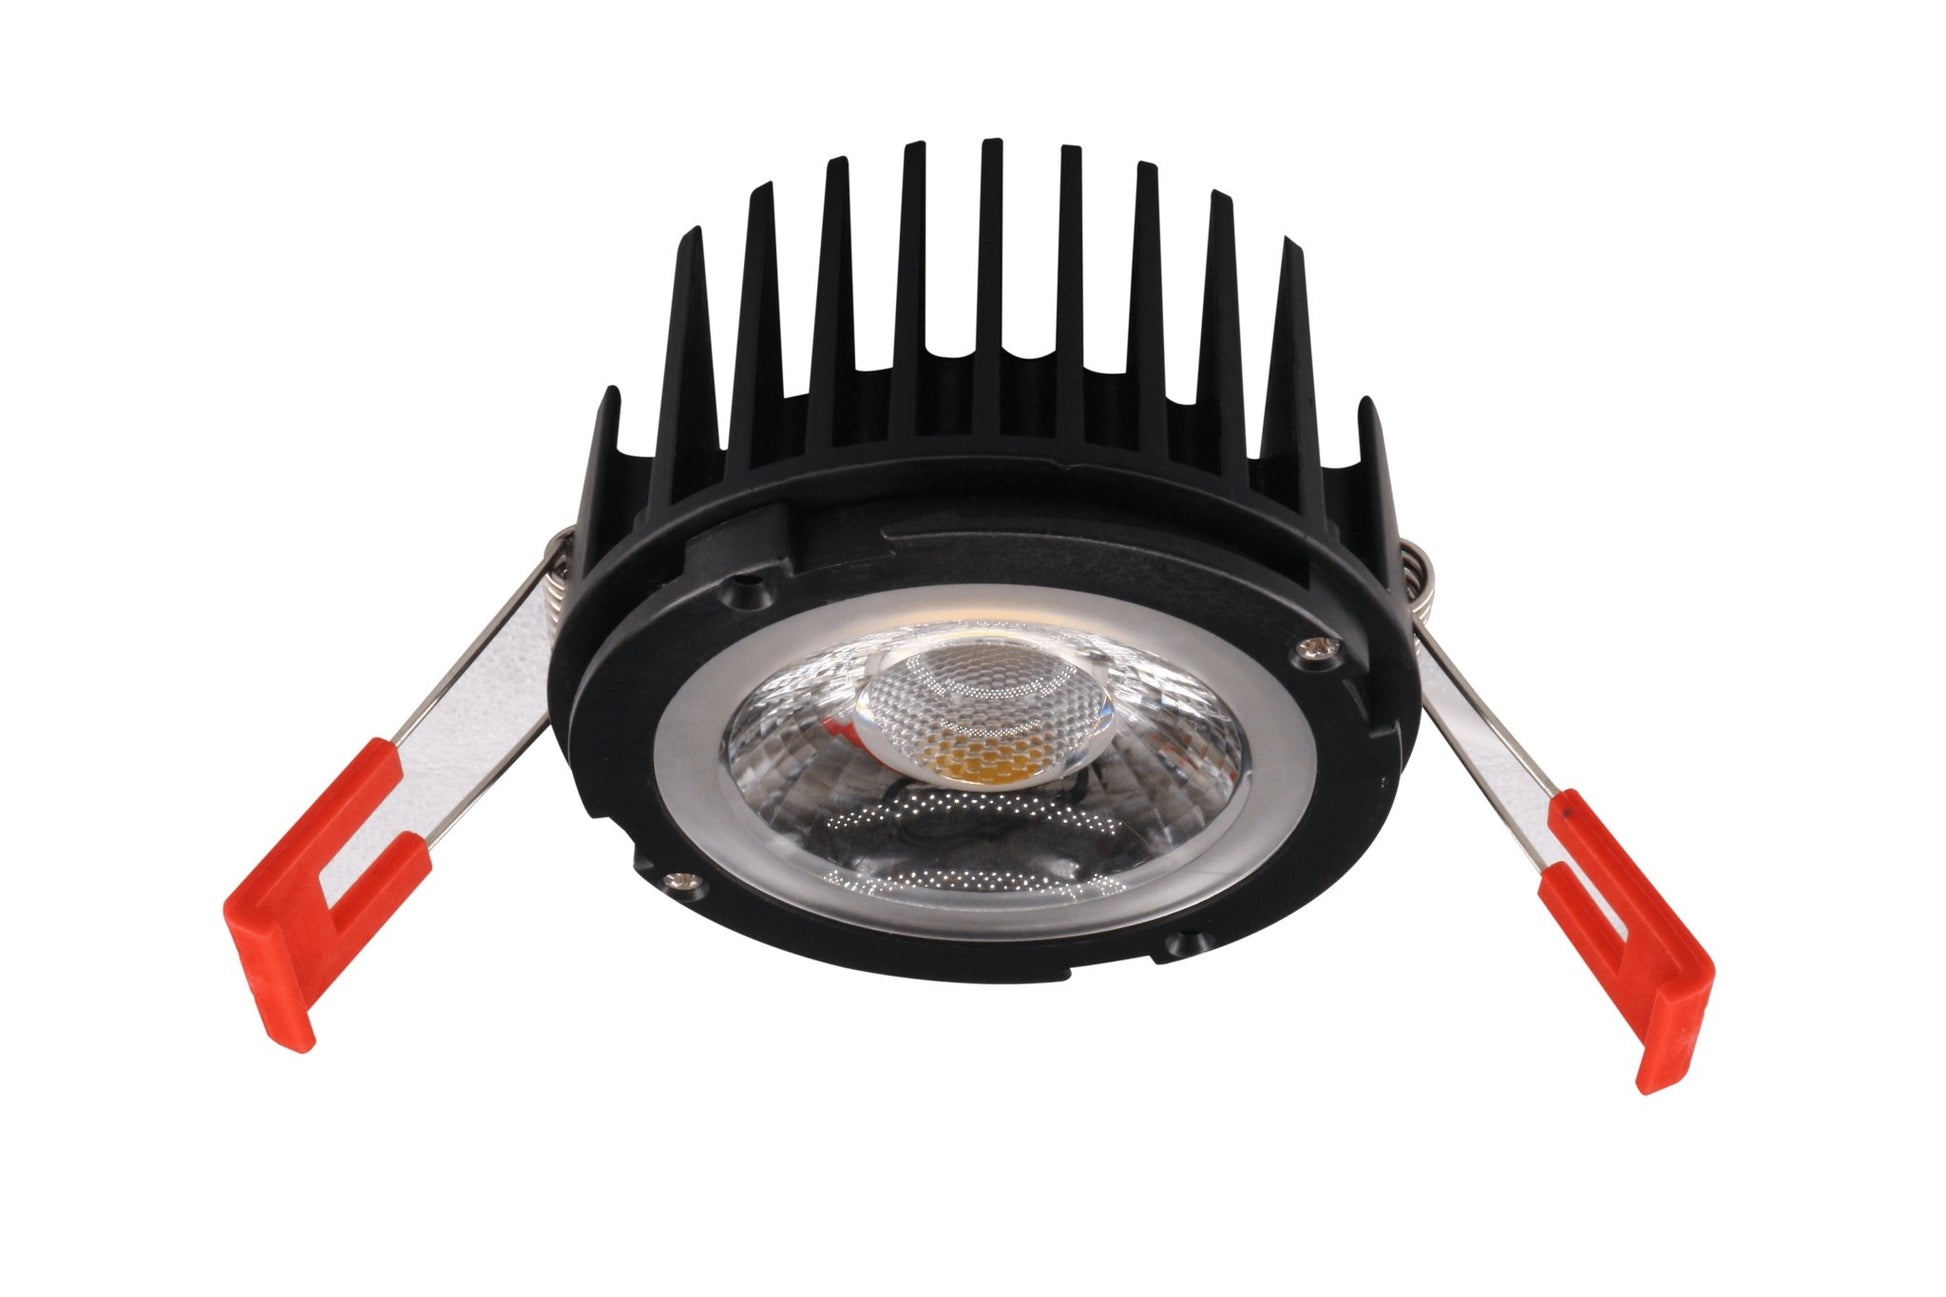 GDL-G48324Goodlite G-48324 4" 15W LED Regress Luminaire Selectable CCT